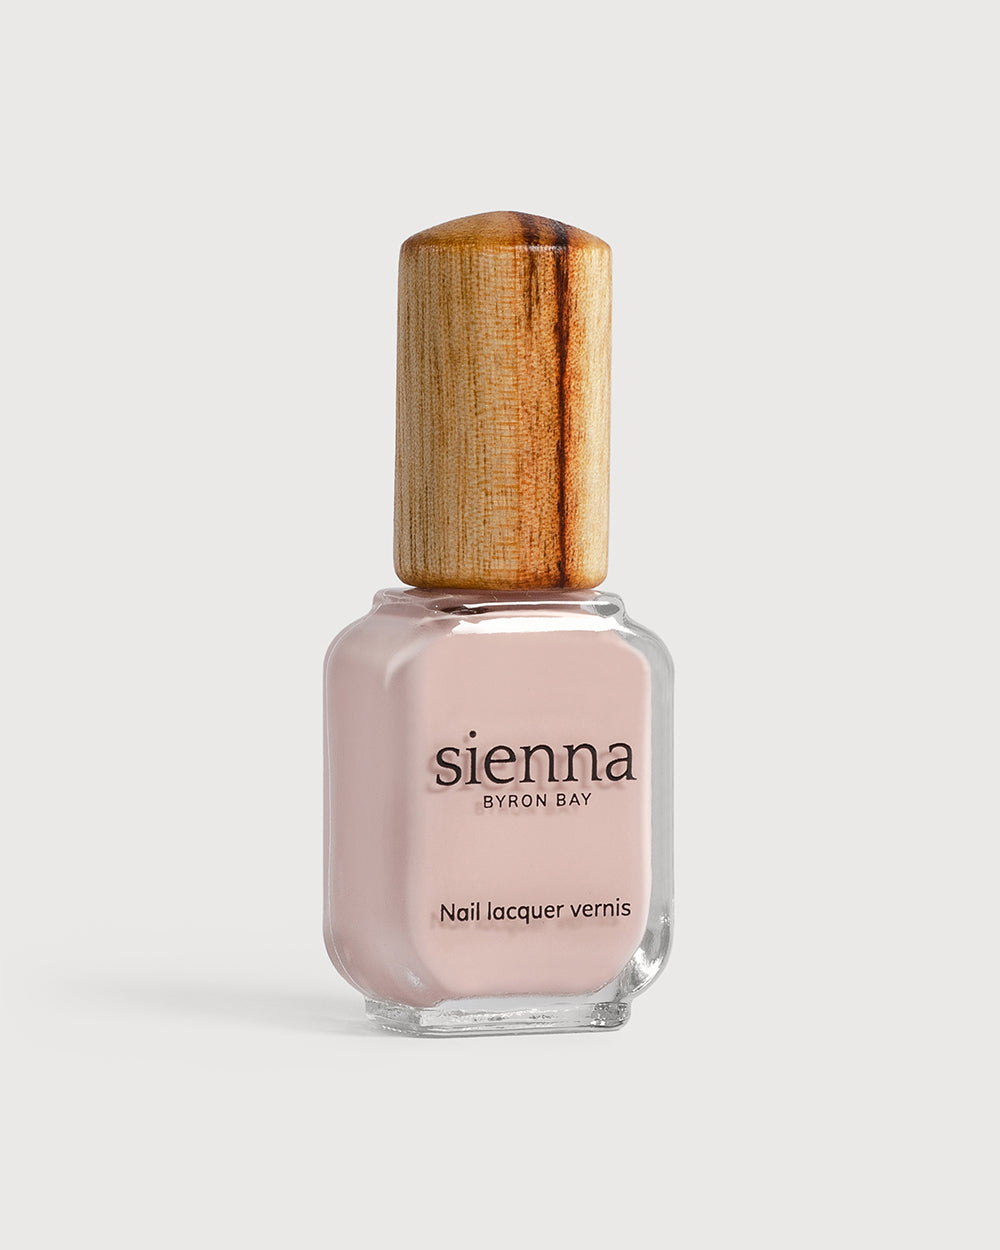 Light champagne pink nail polish glass bottle with timber cap